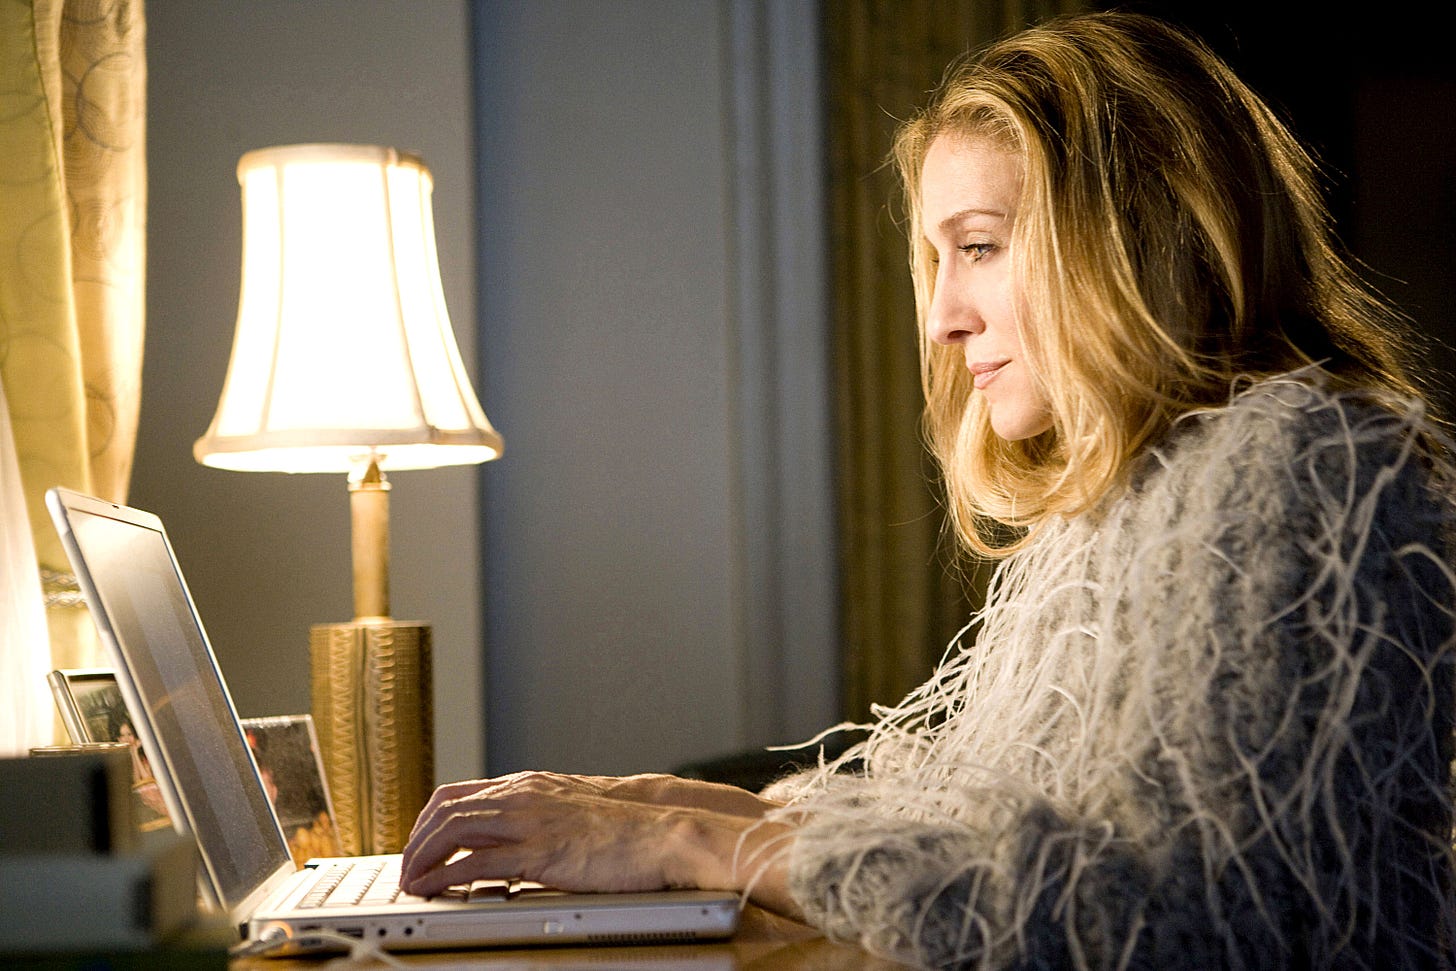 Work From Home: 6 Stylish Onscreen Characters to Inspire Your WFH Style |  Vogue